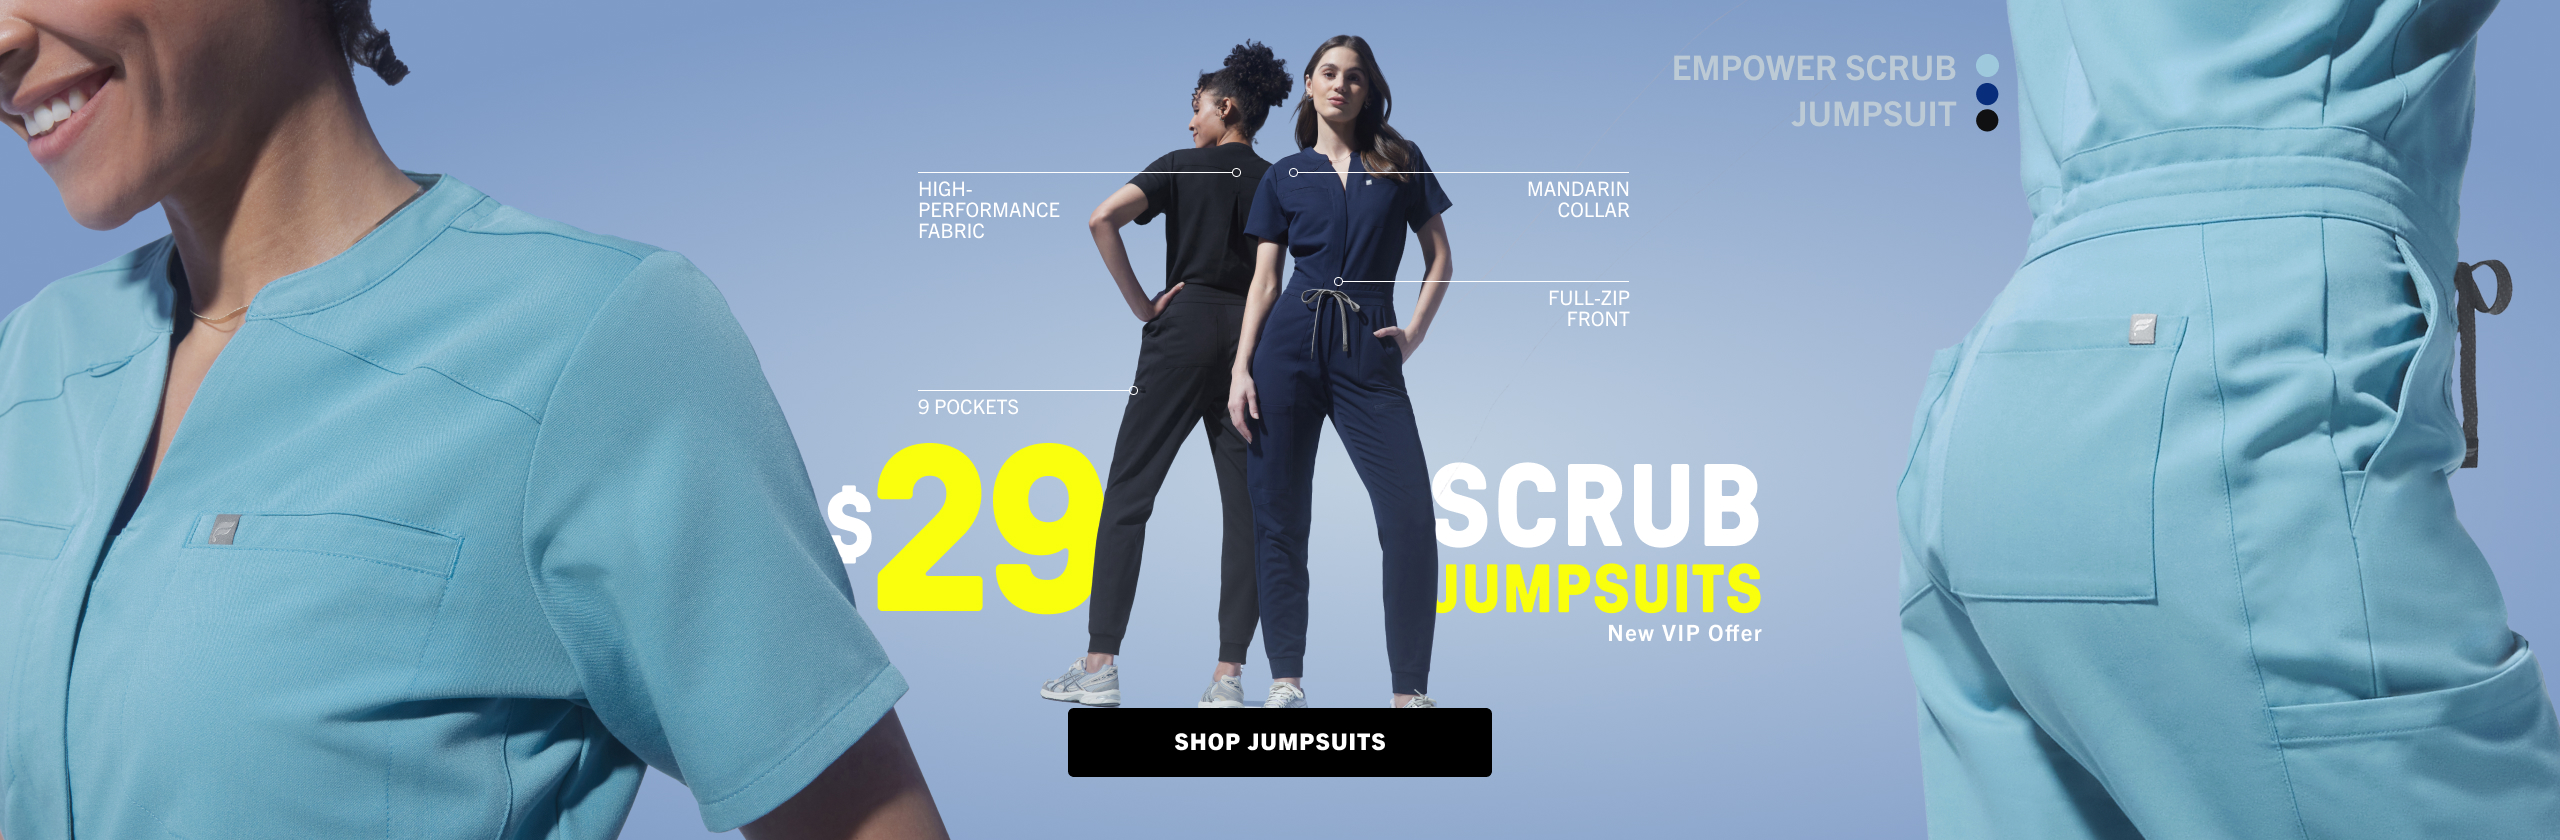 jump into our latest drop. New jumpsuit for $29 when you checkout as a new VIP member.